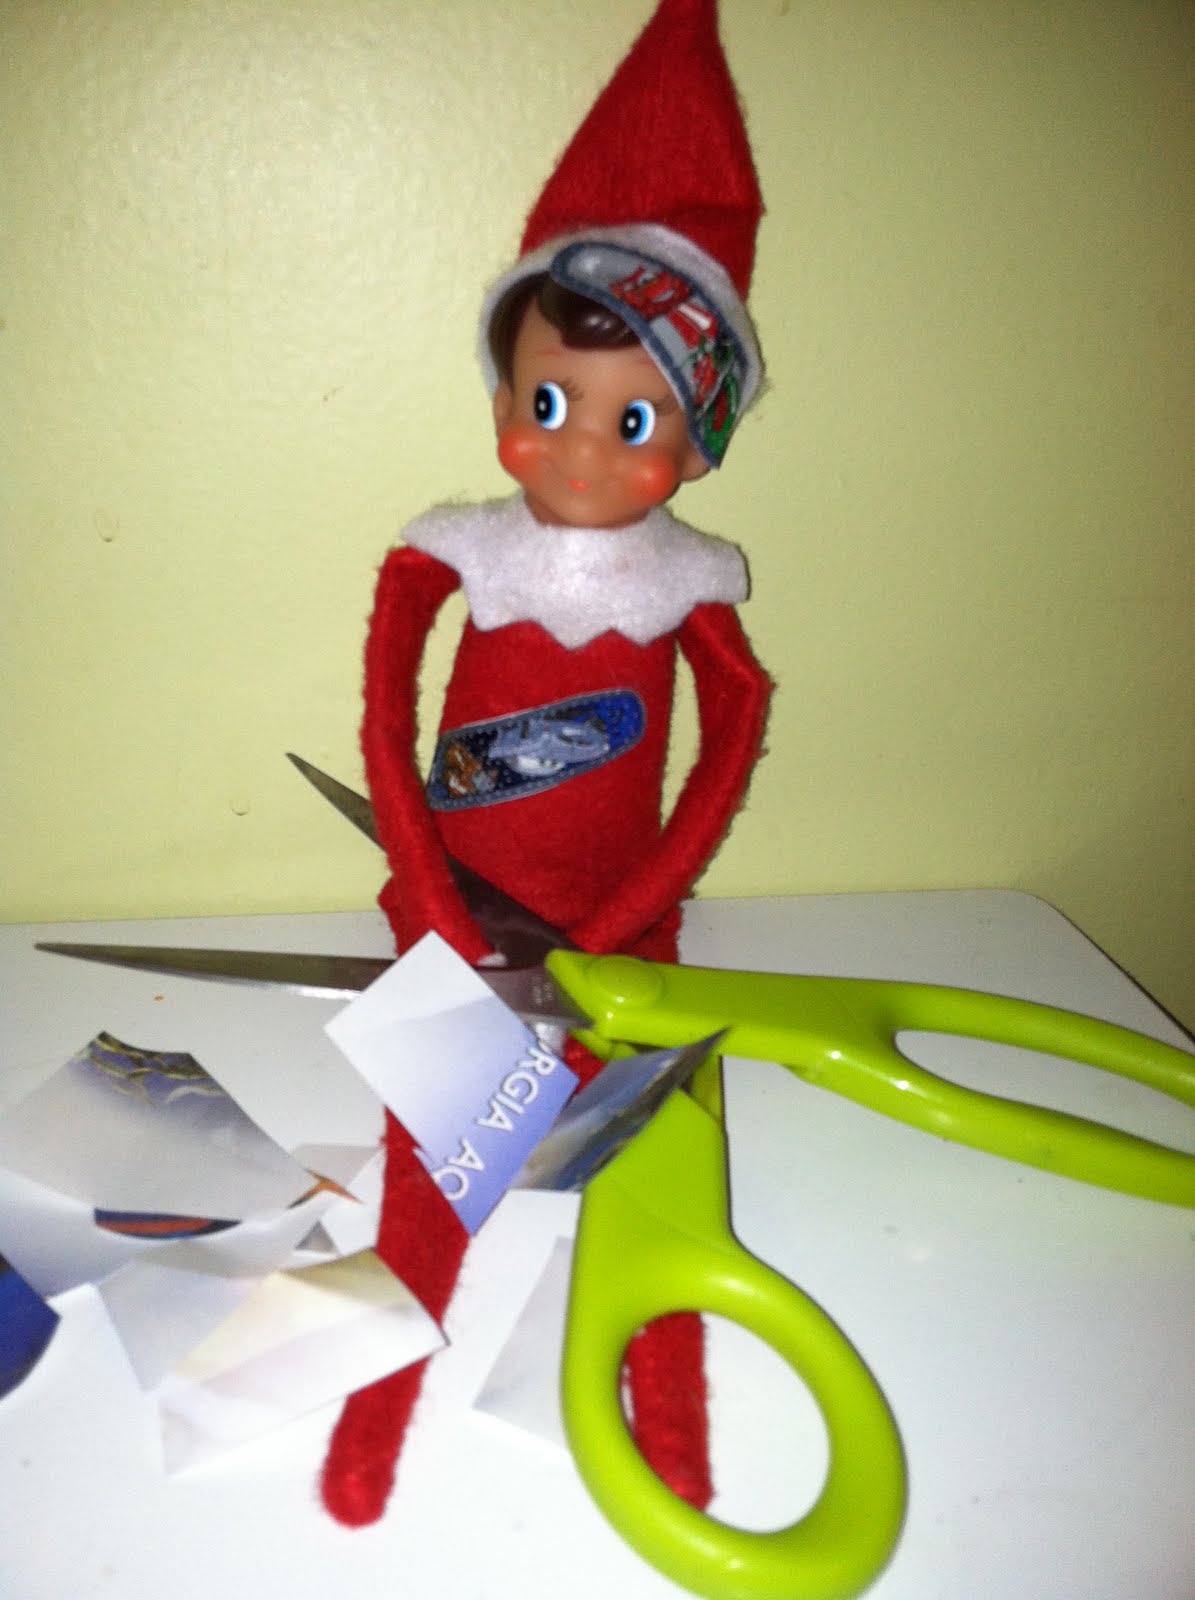 The Lanums Lately: it's elf on the shelf time!